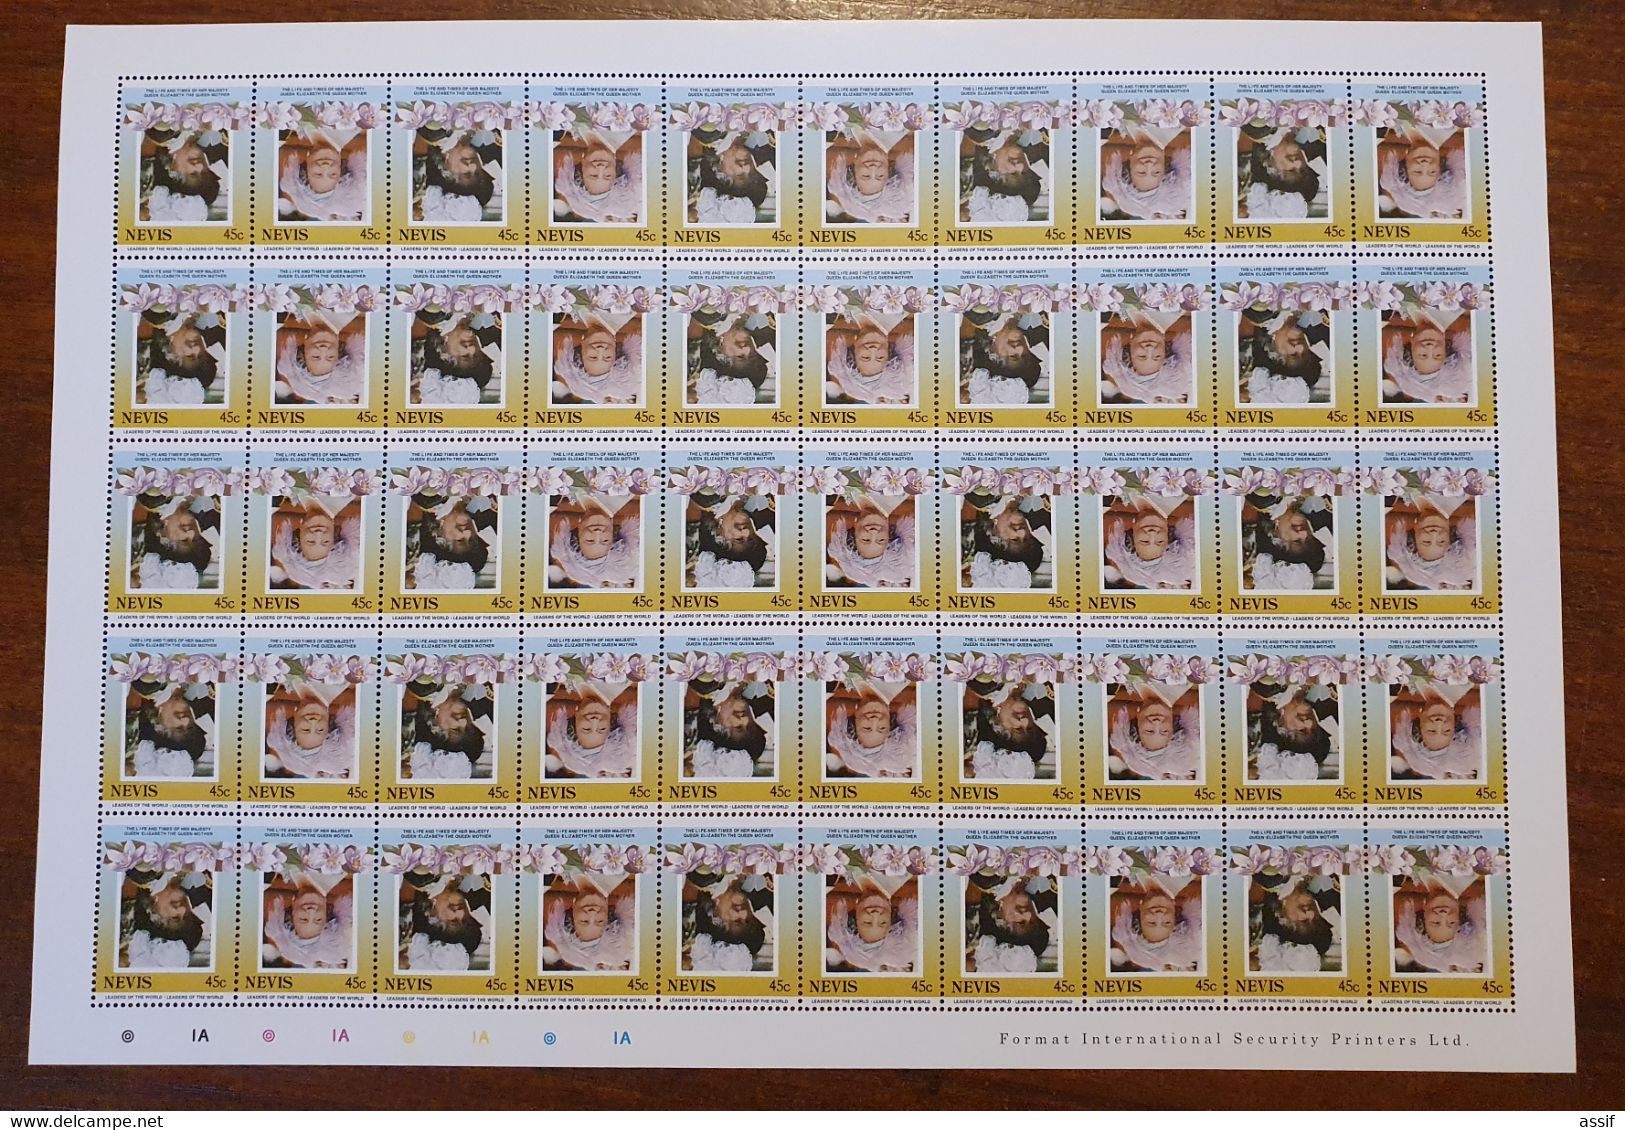 NEVIS 45c 1985 FEUILLE ENTIERE CENTRE RENVERSE SHEET INVERTED YT 311 Et 312 50 TIMBRES NEUFS ** /FREE SHIPPING R - St.Kitts And Nevis ( 1983-...)